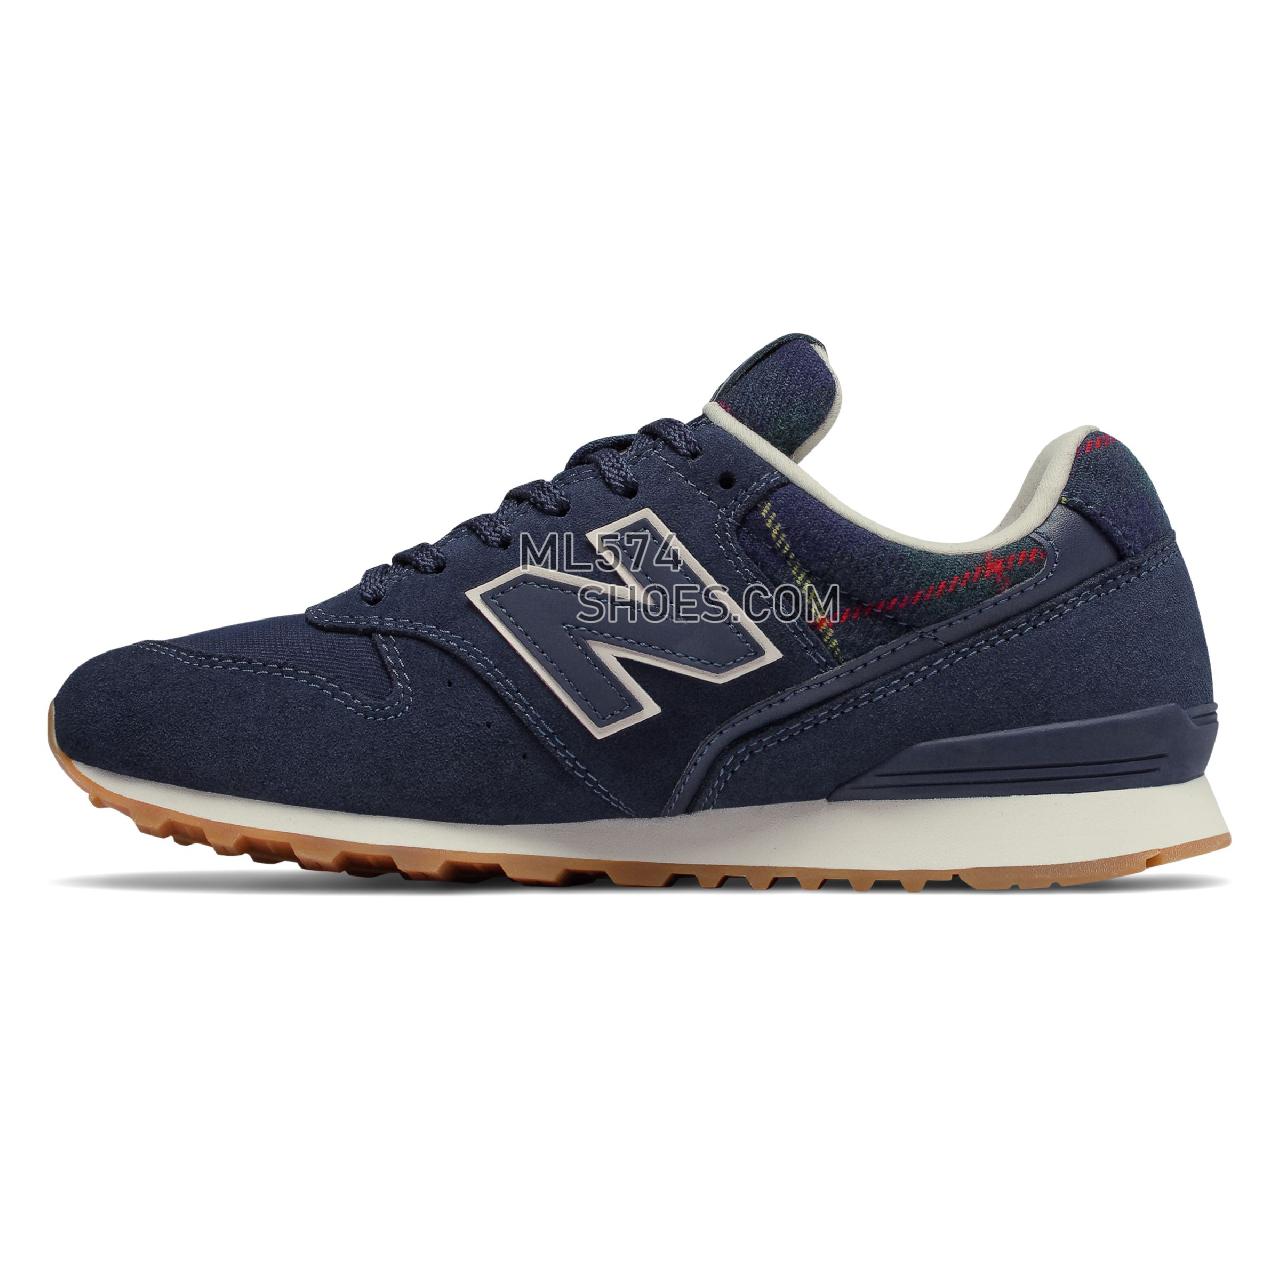 New Balance 996 - Women's Classic Sneakers - Eclipse with Black - WL996CI